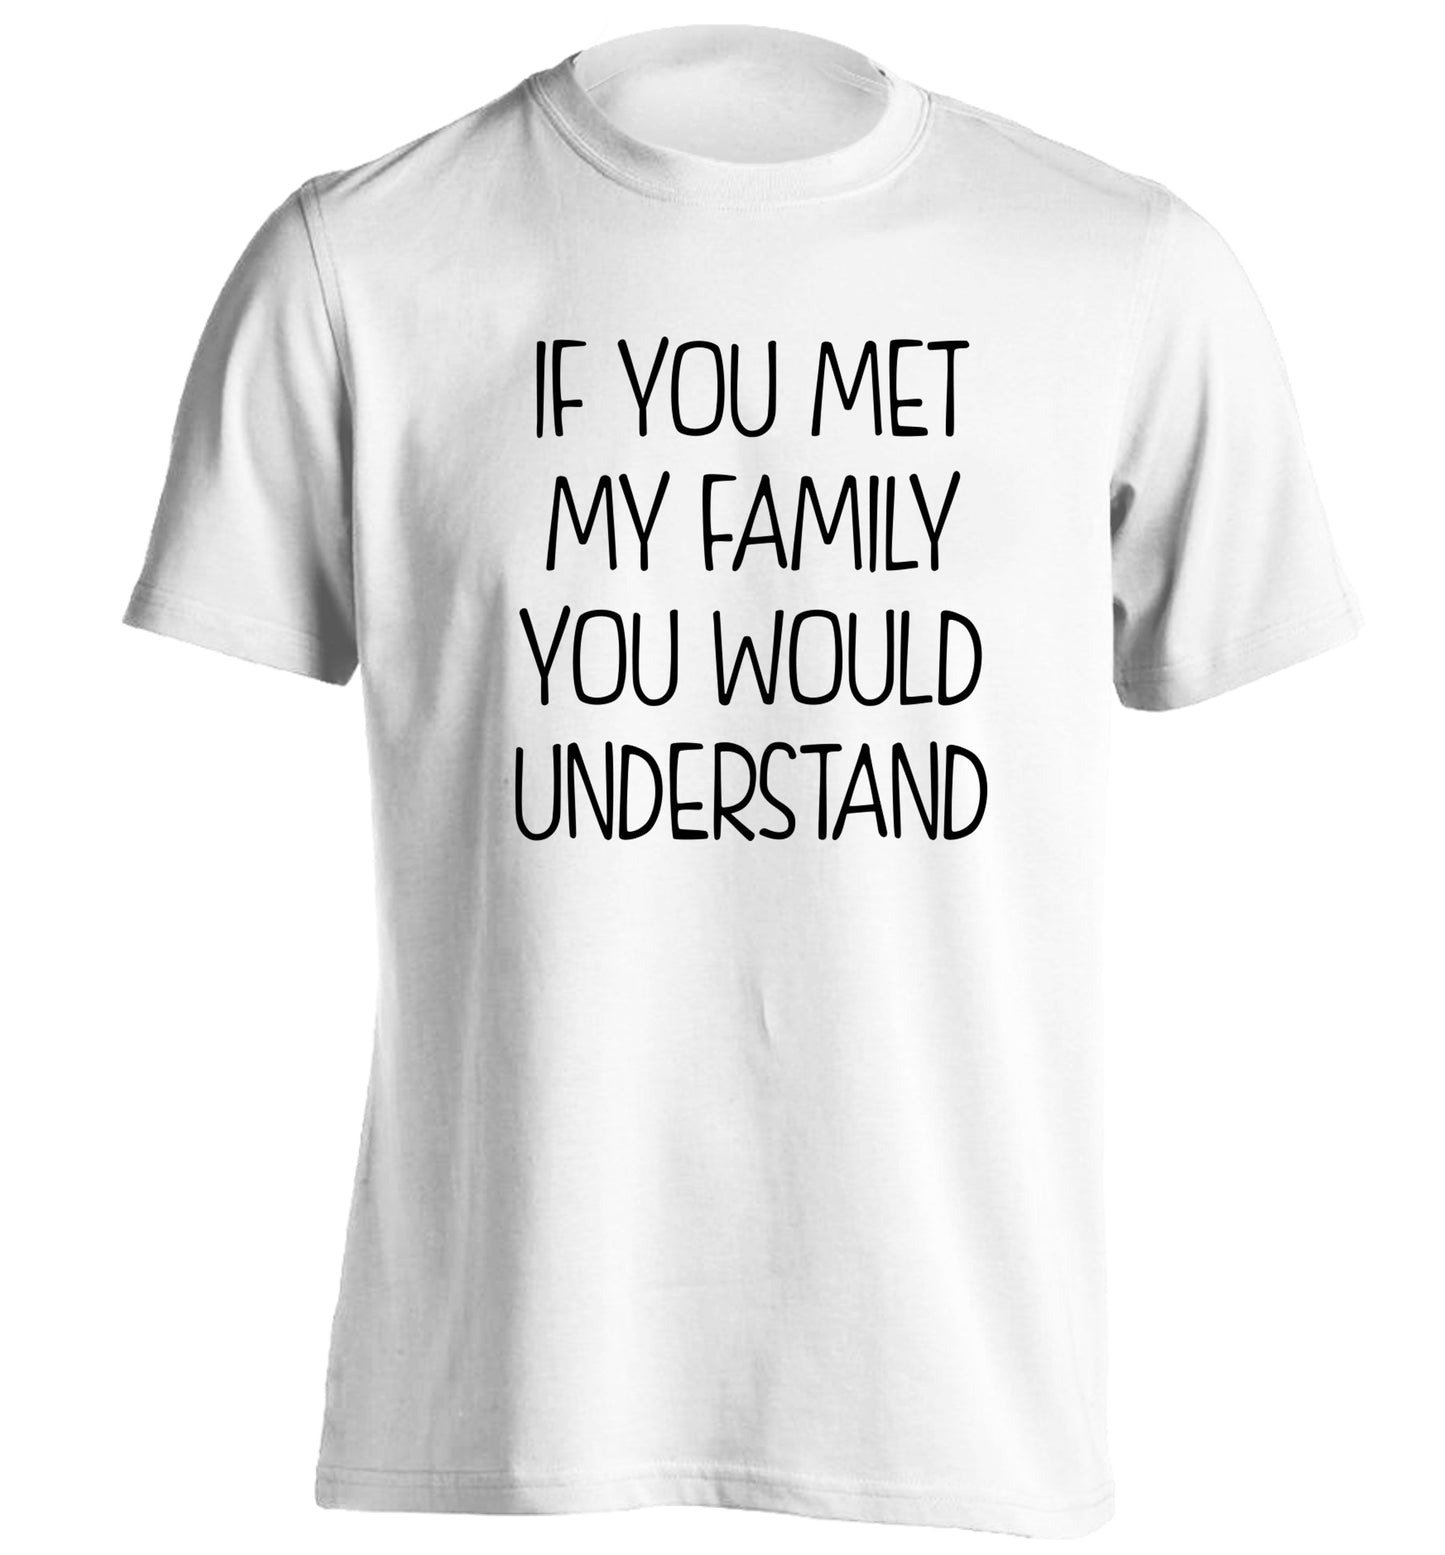 If you met my family you would understand adults unisex white Tshirt 2XL